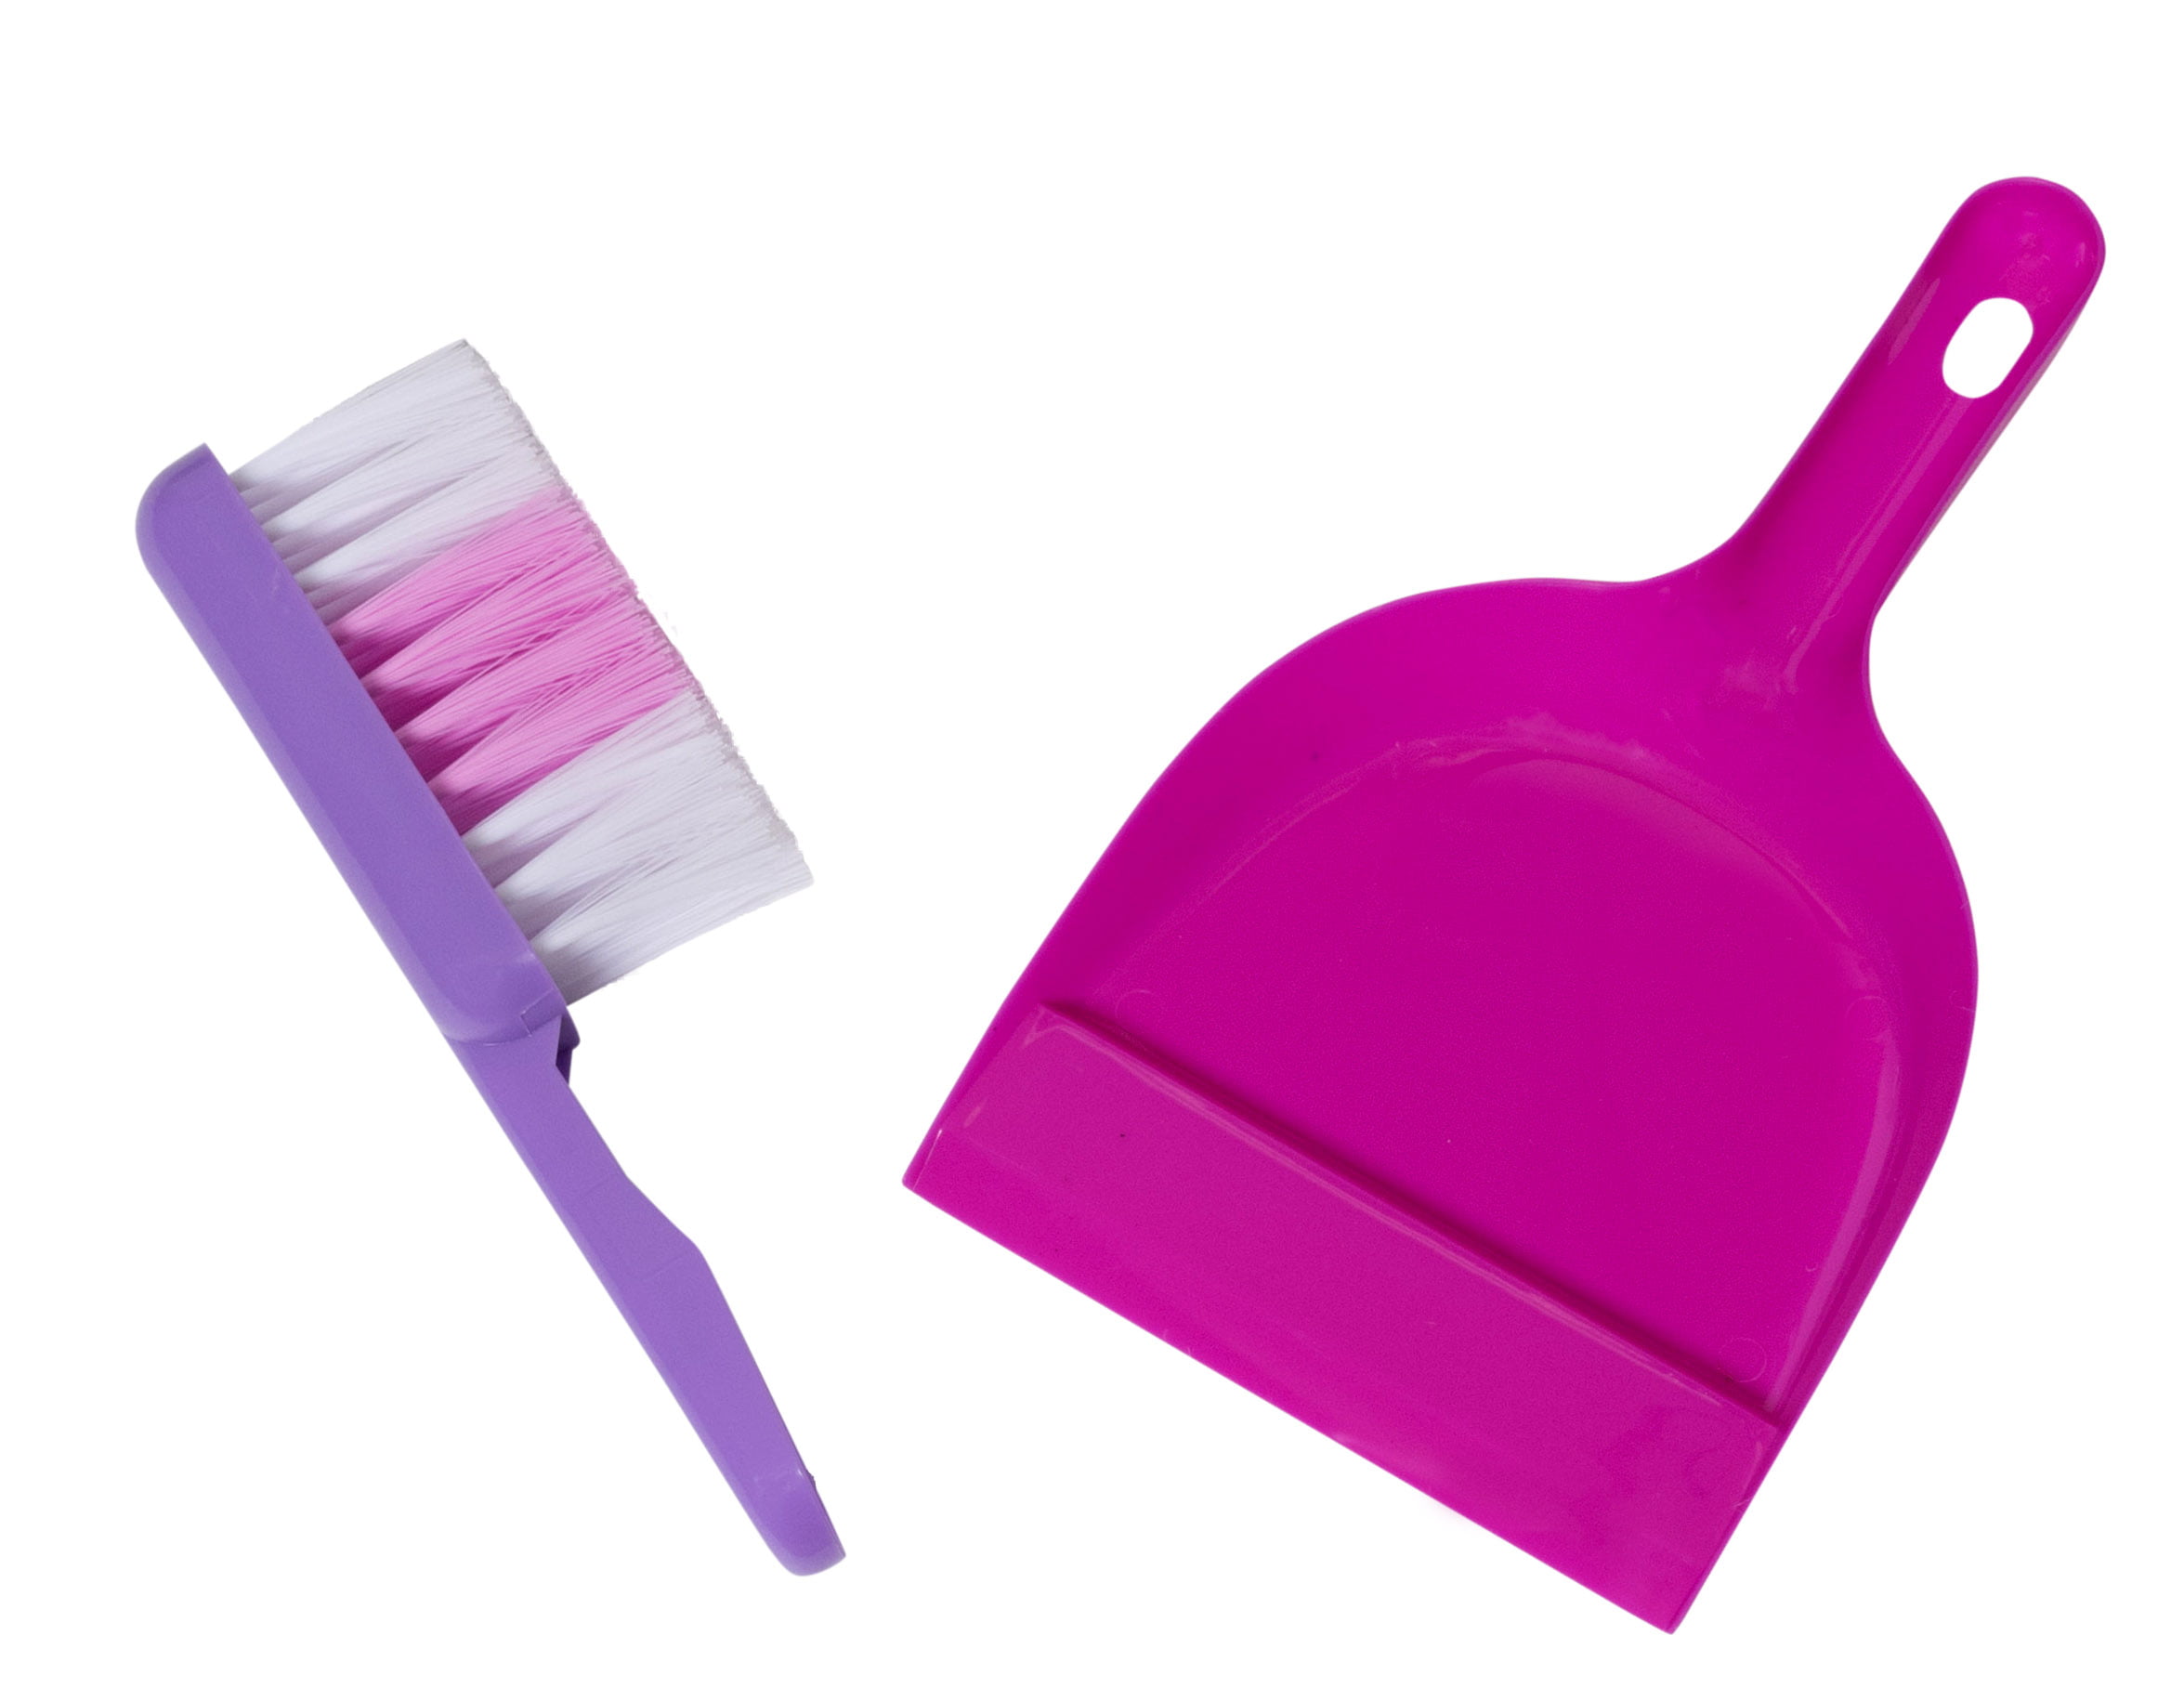 Set for Kids for Toddlers Playing and Home Cleaning Pretended Play Game Toy 3pcs Small Mop Dustpan Broom YunZyun Kids Household Cleaning Set Pink 